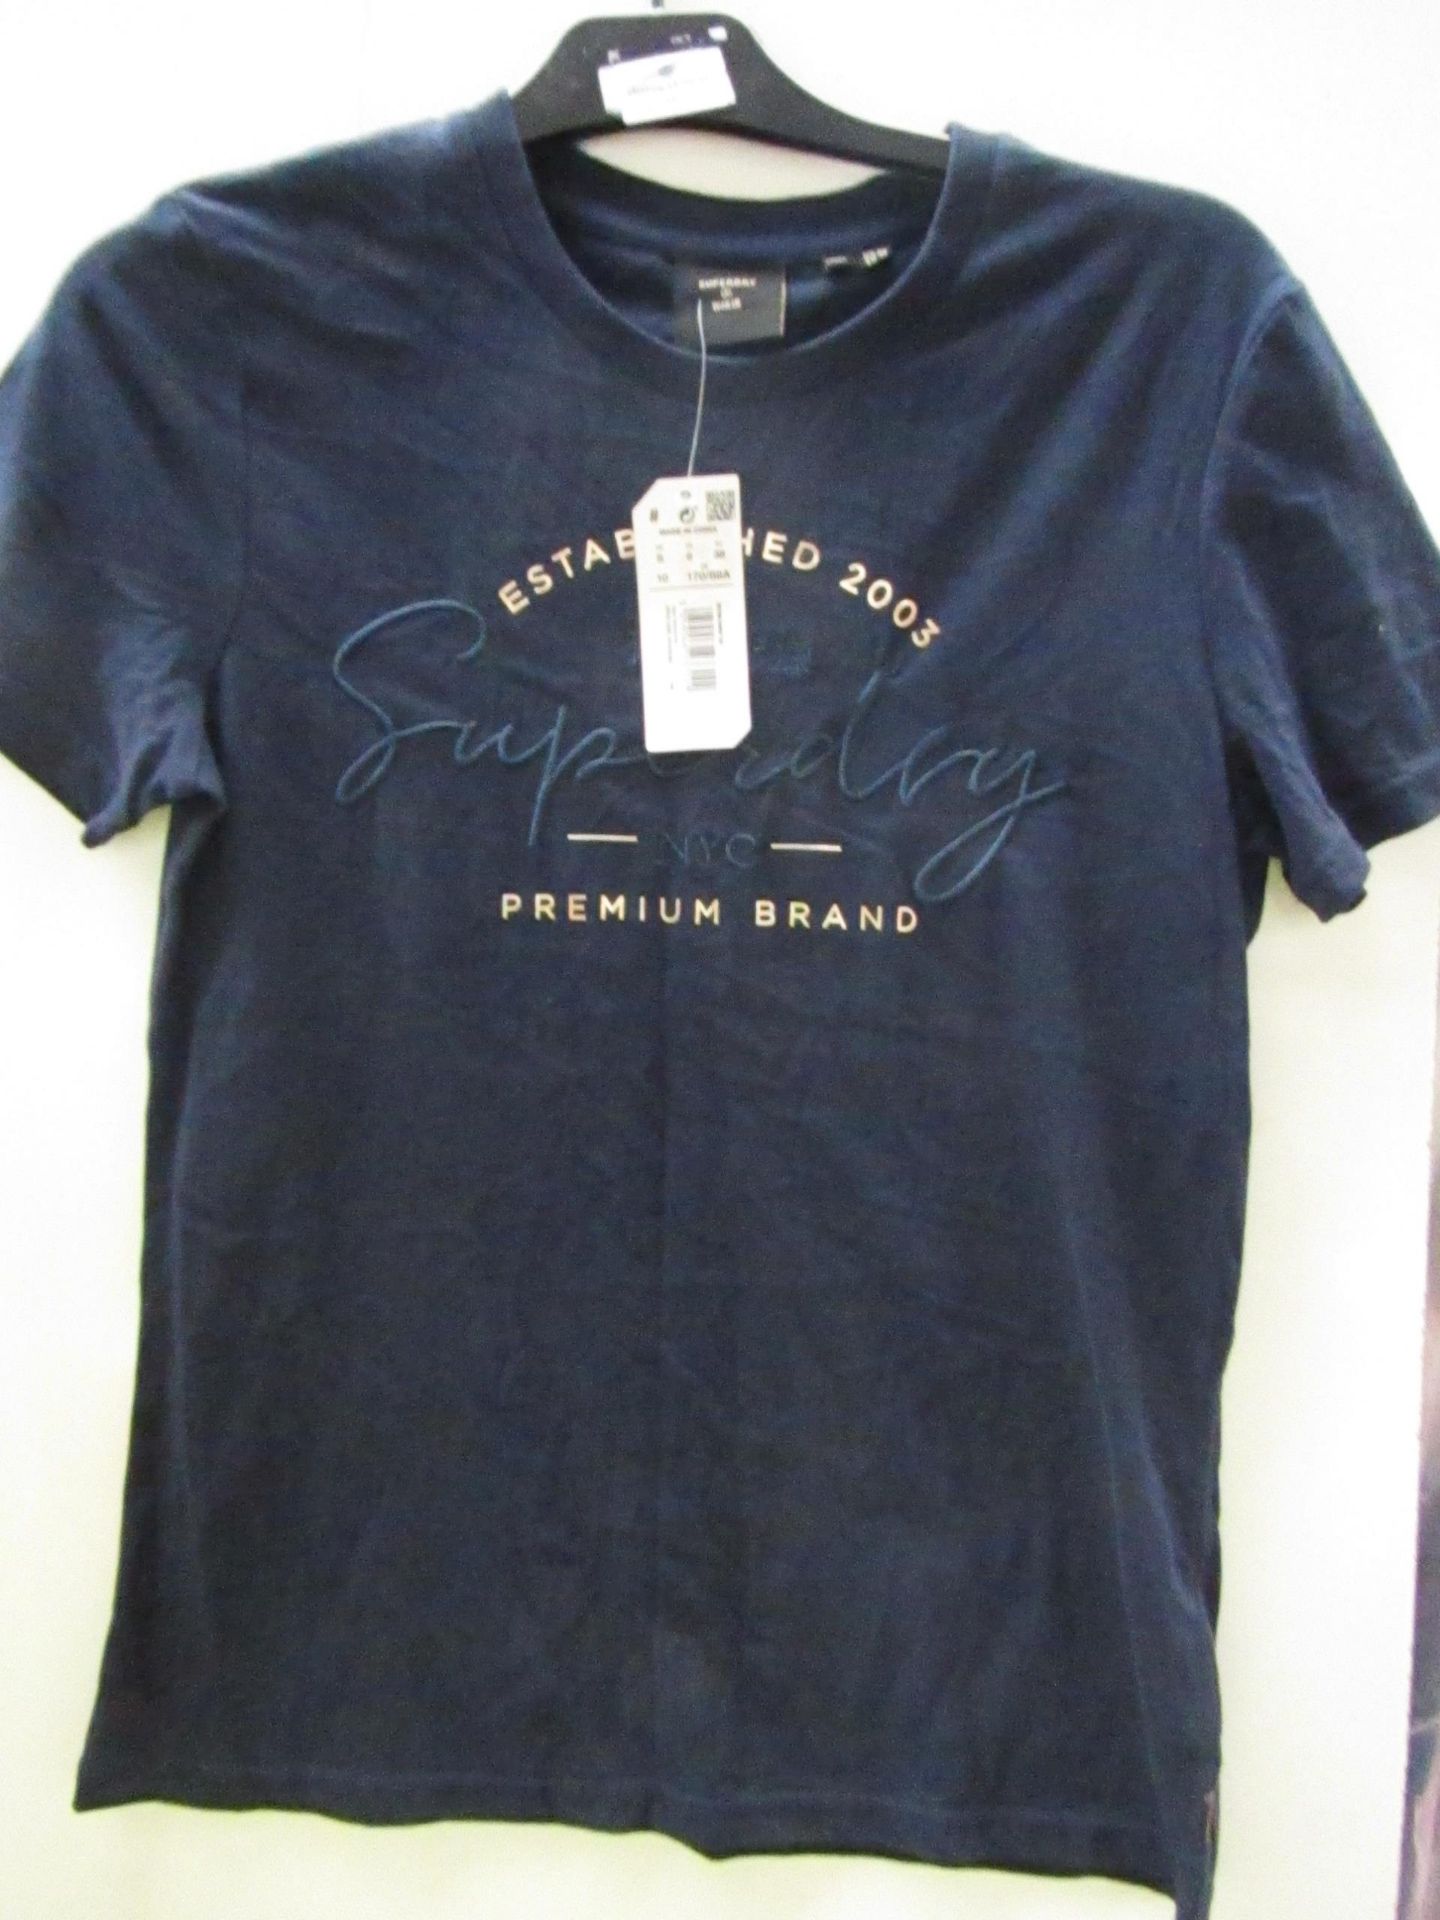 Superdry T/Shirt Navy Size S New With Tags